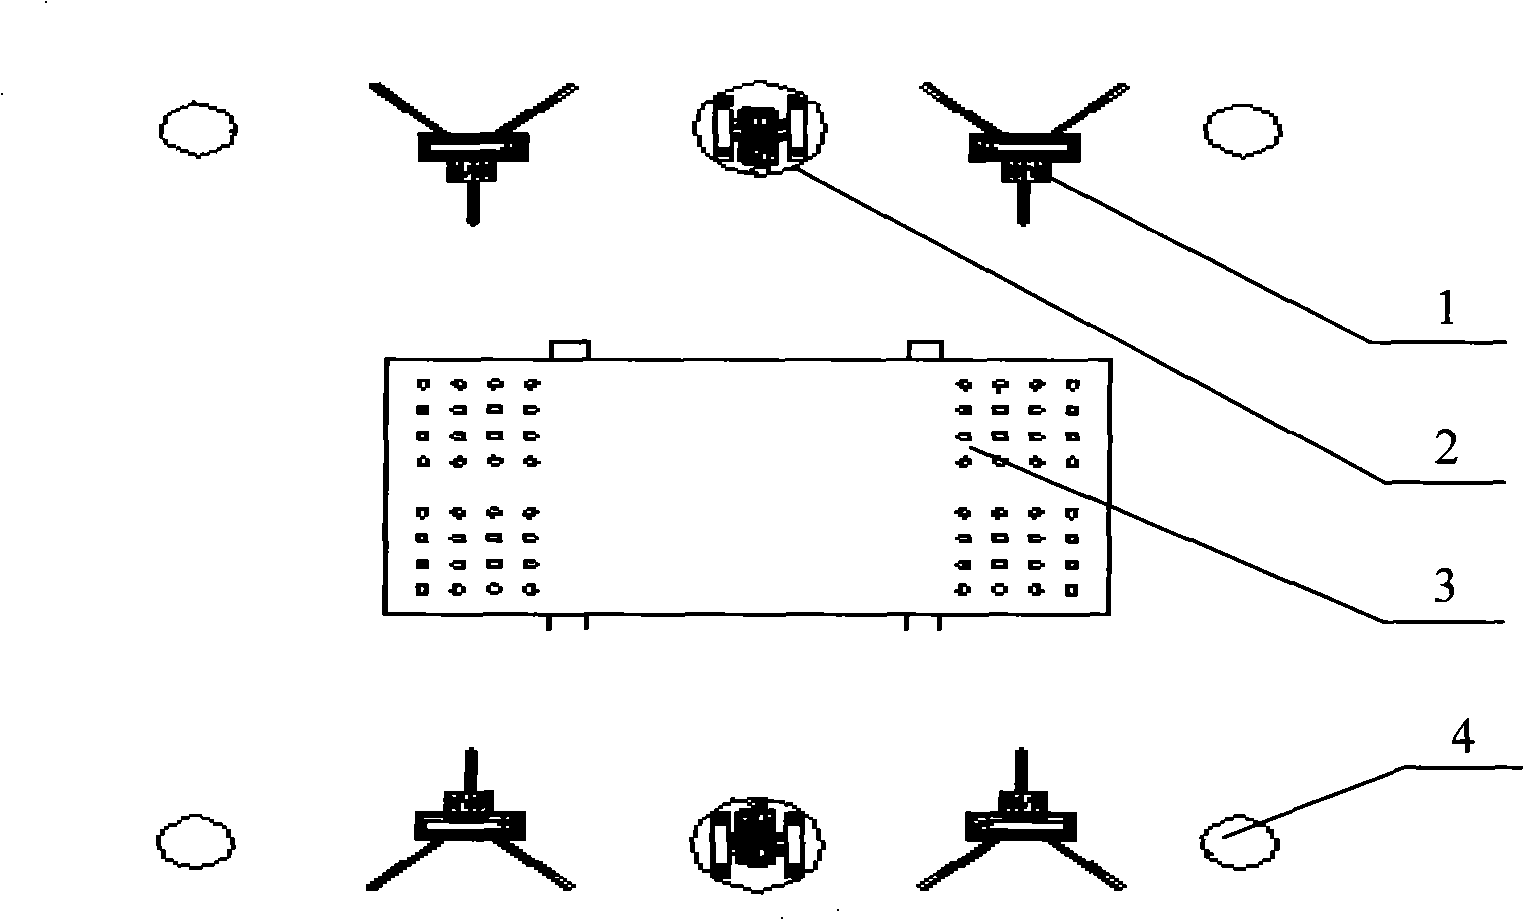 Computer simulation assembling method for steel structure assembly